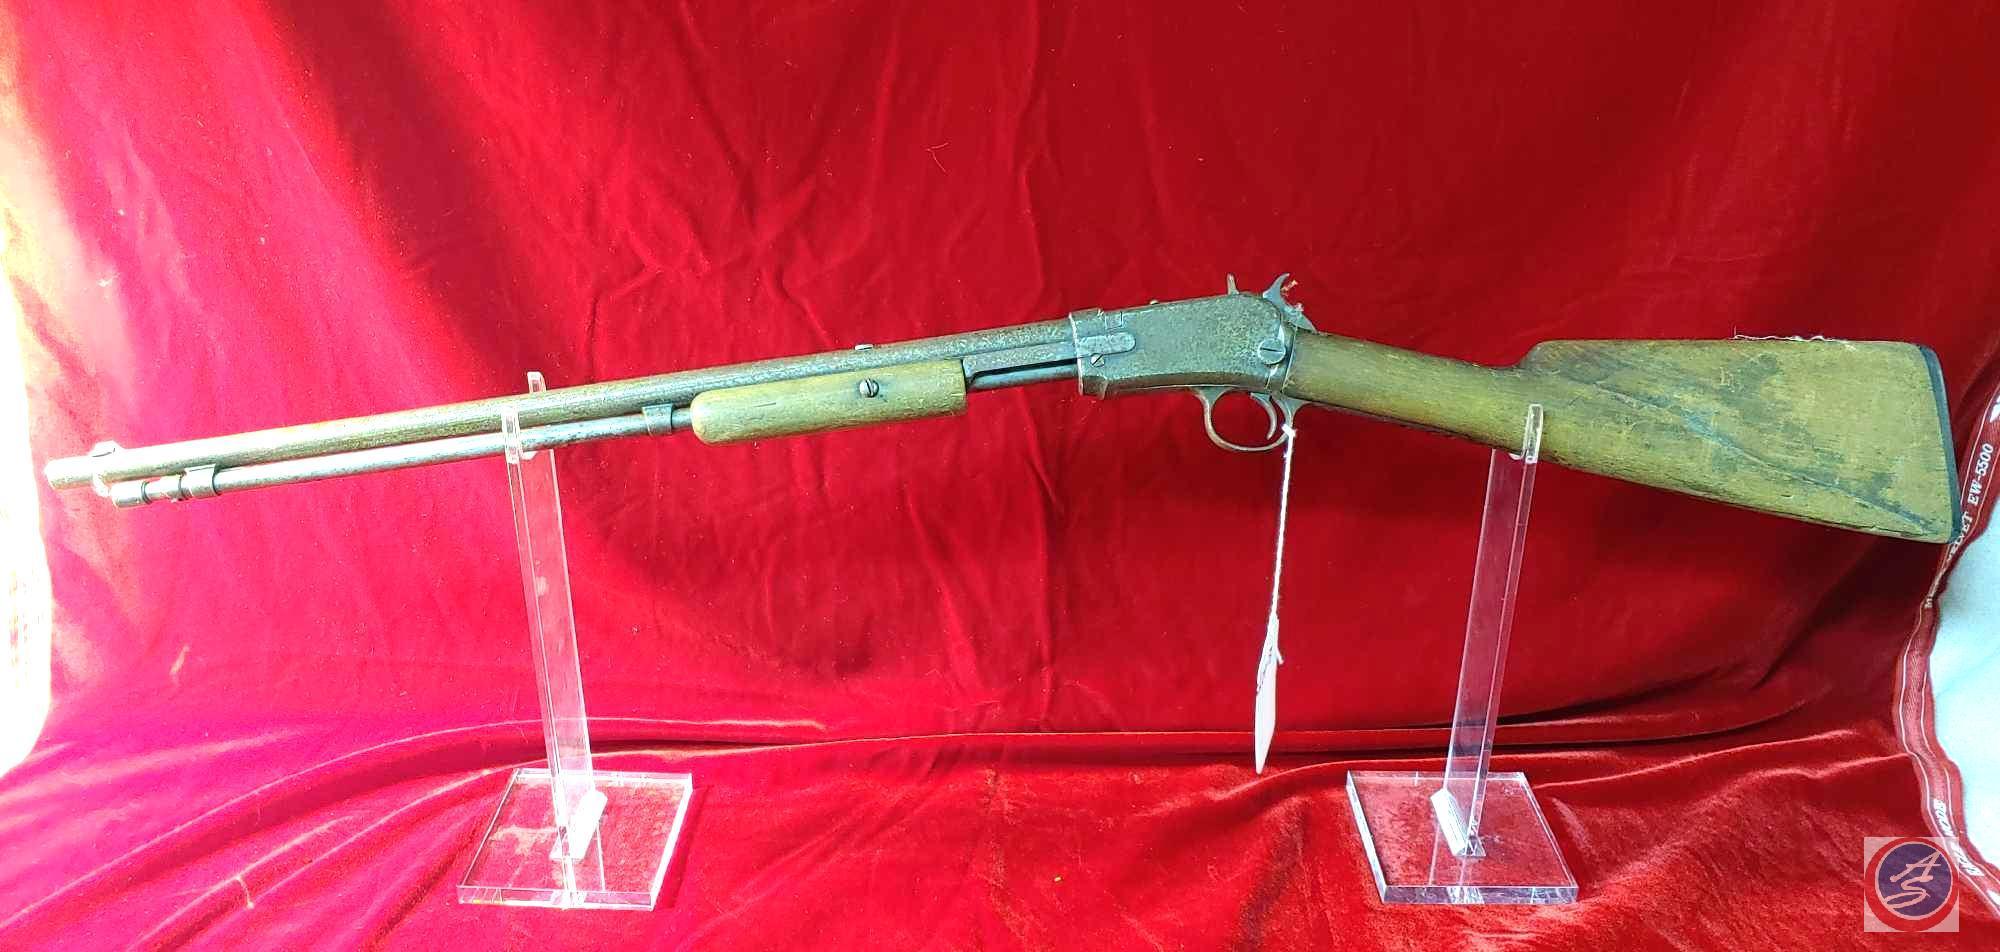 Manufacturer: Winchester Repaeting Arms Model: Model 1906 FirearmType: Rifle SerialNumber: Made in